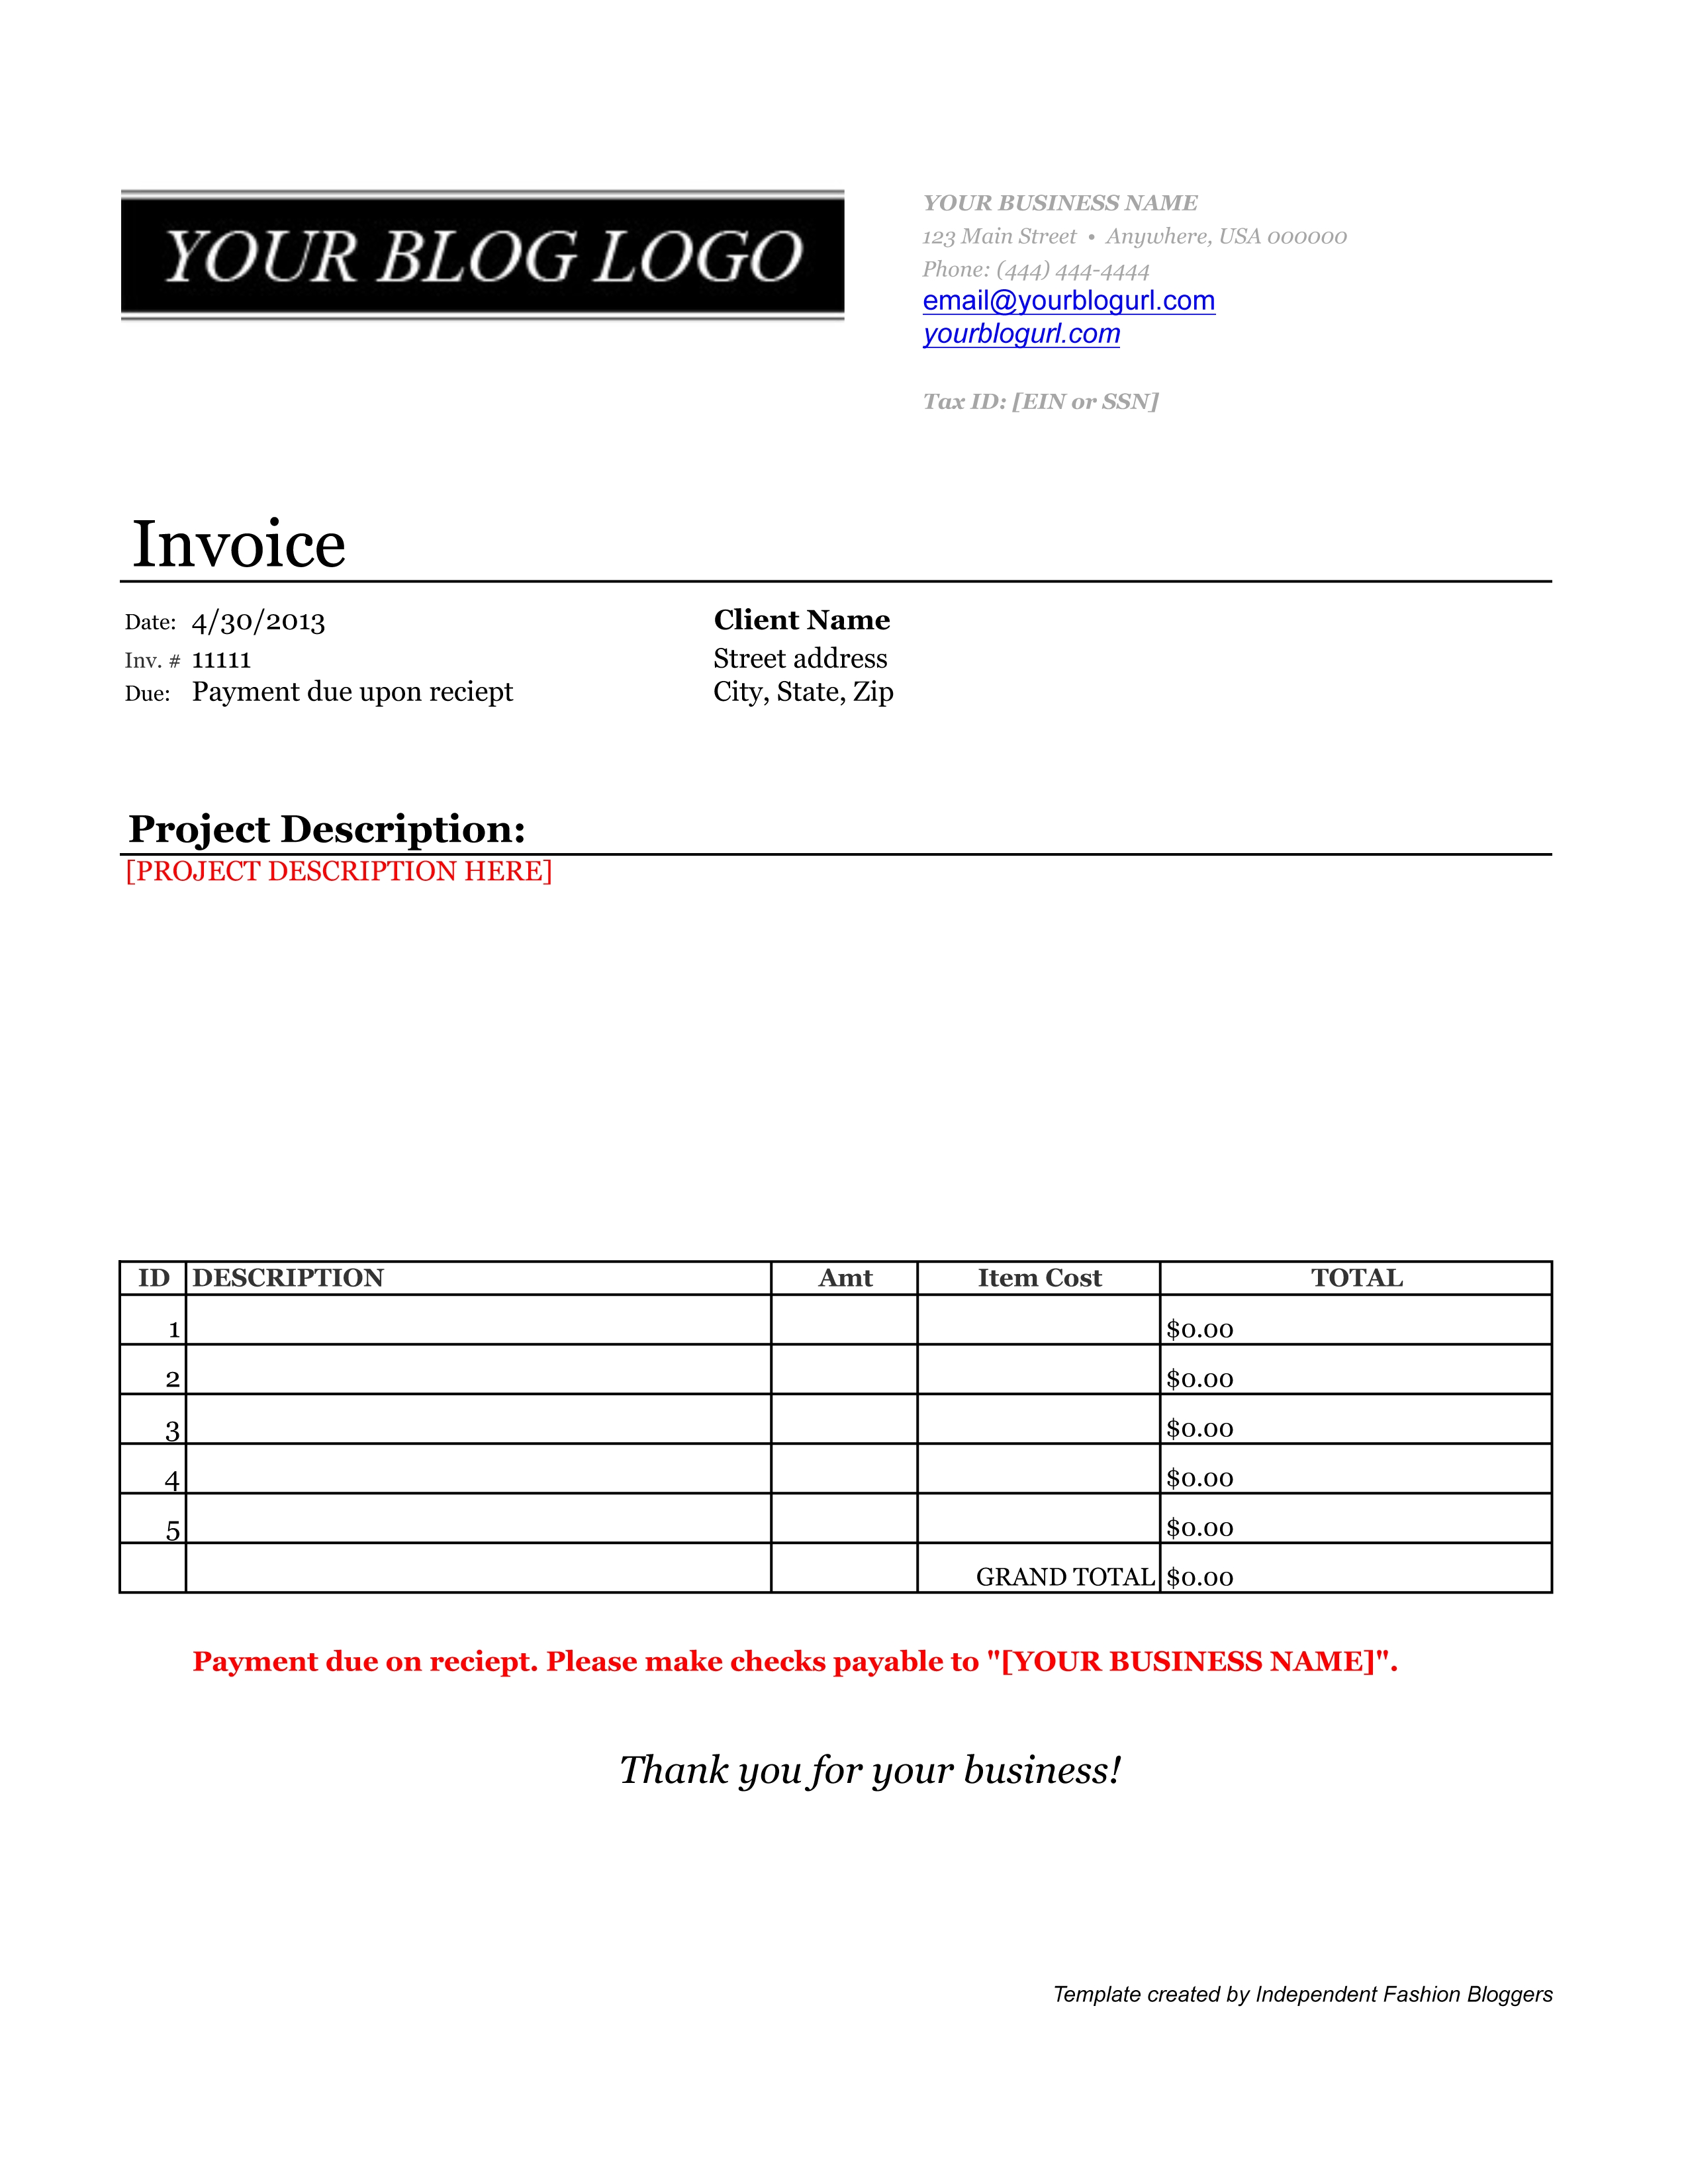 get paid invoice template for your blogger services sample of payment invoice